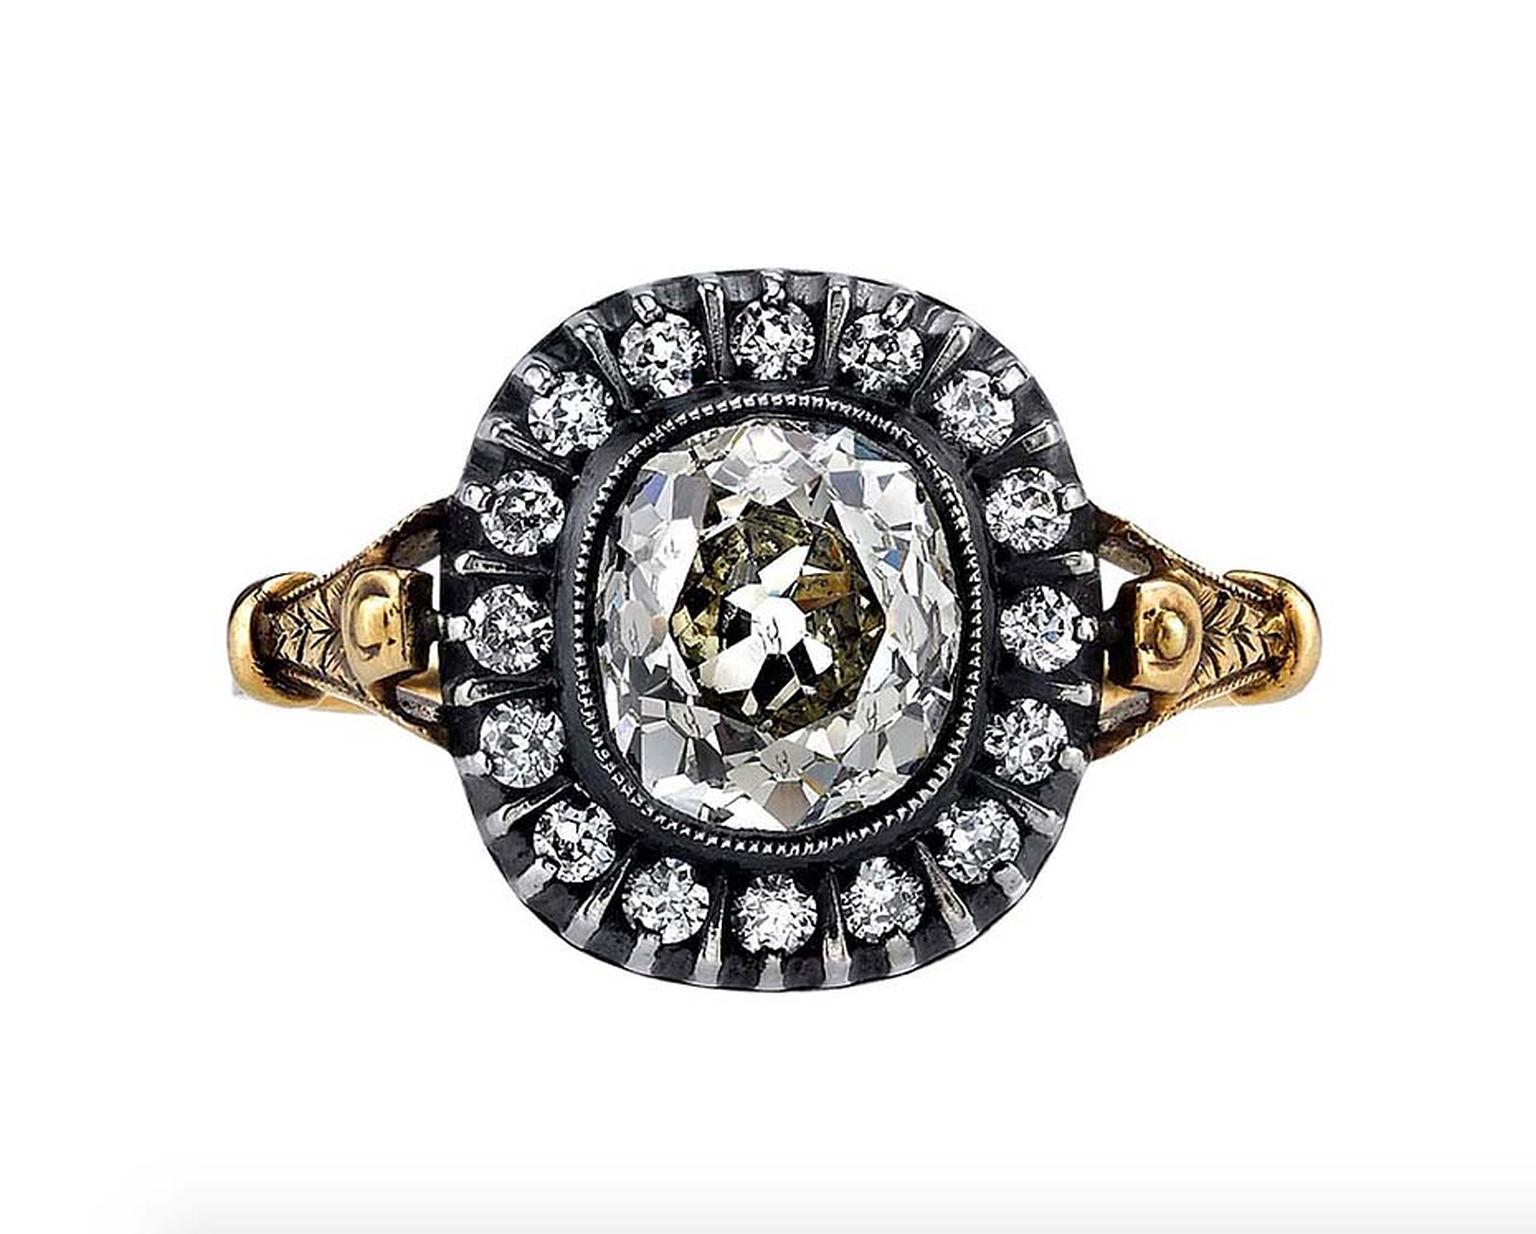 A classic Victorian design, this antique engagement ring features a cushion-cut diamond set in a handcrafted, oxidised, yellow gold and silver mounting, surrounded by a halo of diamonds. Available from 1stdibs.com.